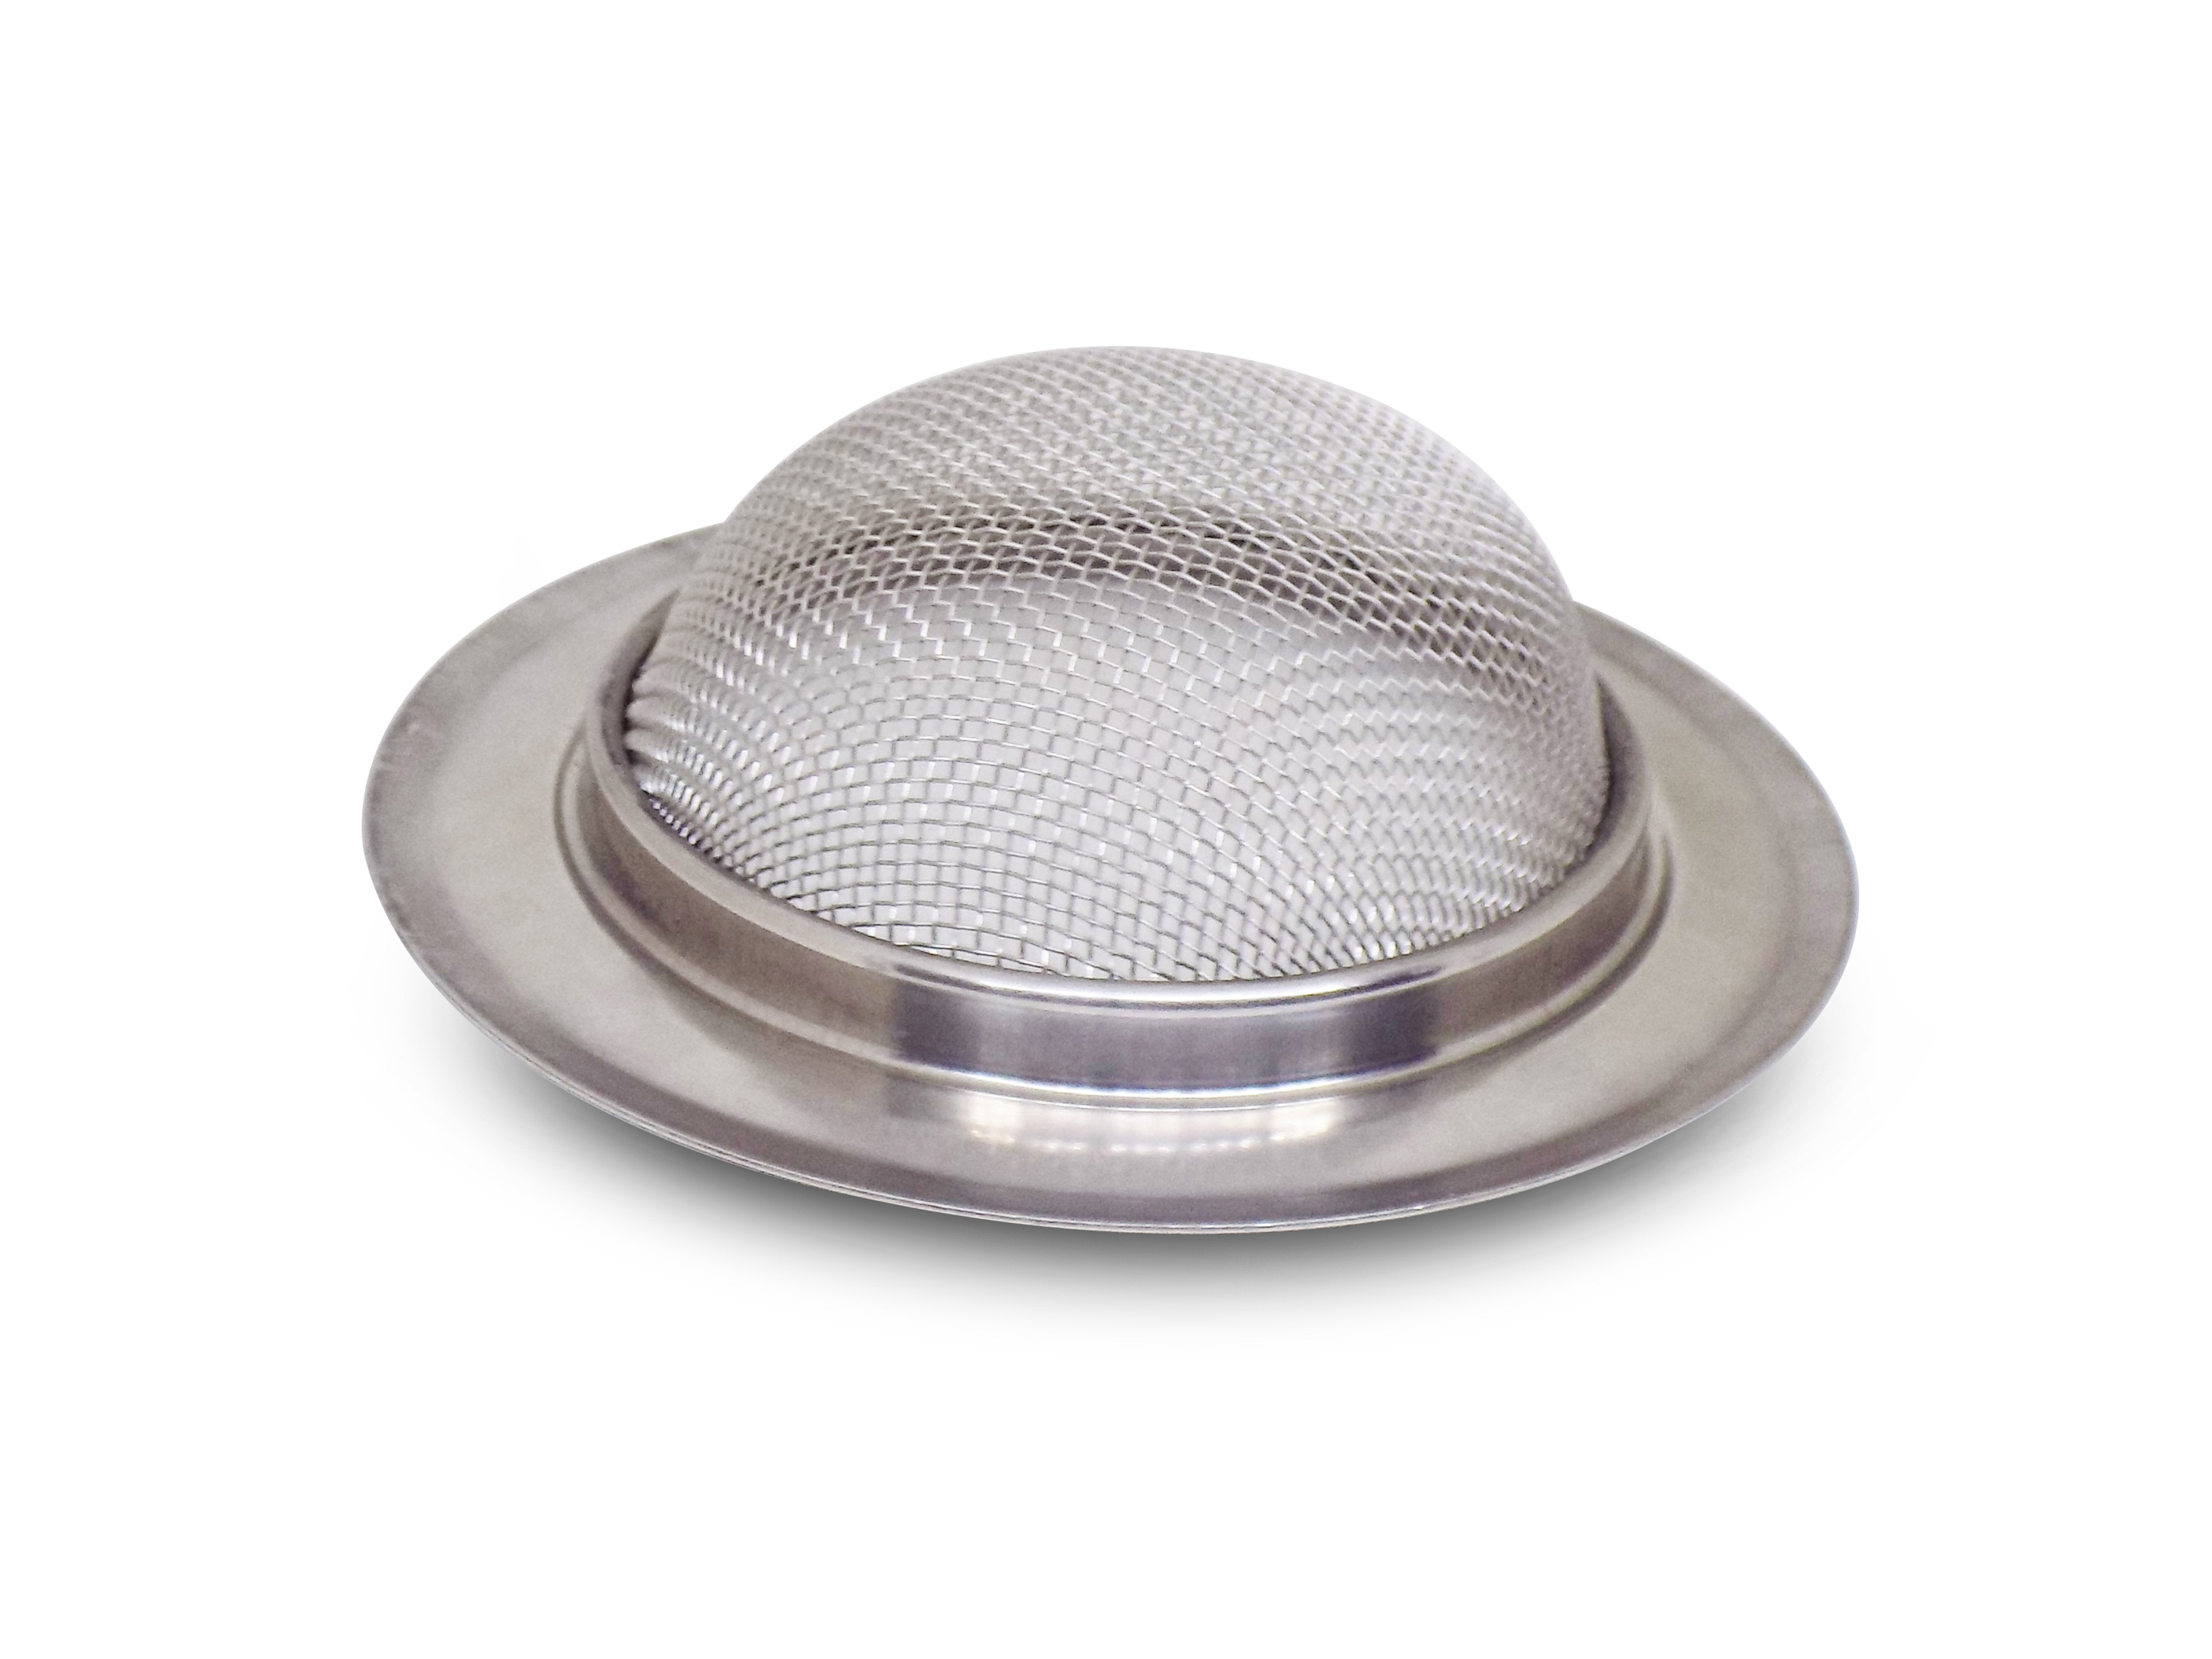 0790 Large Stainless Steel Sink/Wash Basin Drain Strainer - SkyShopy